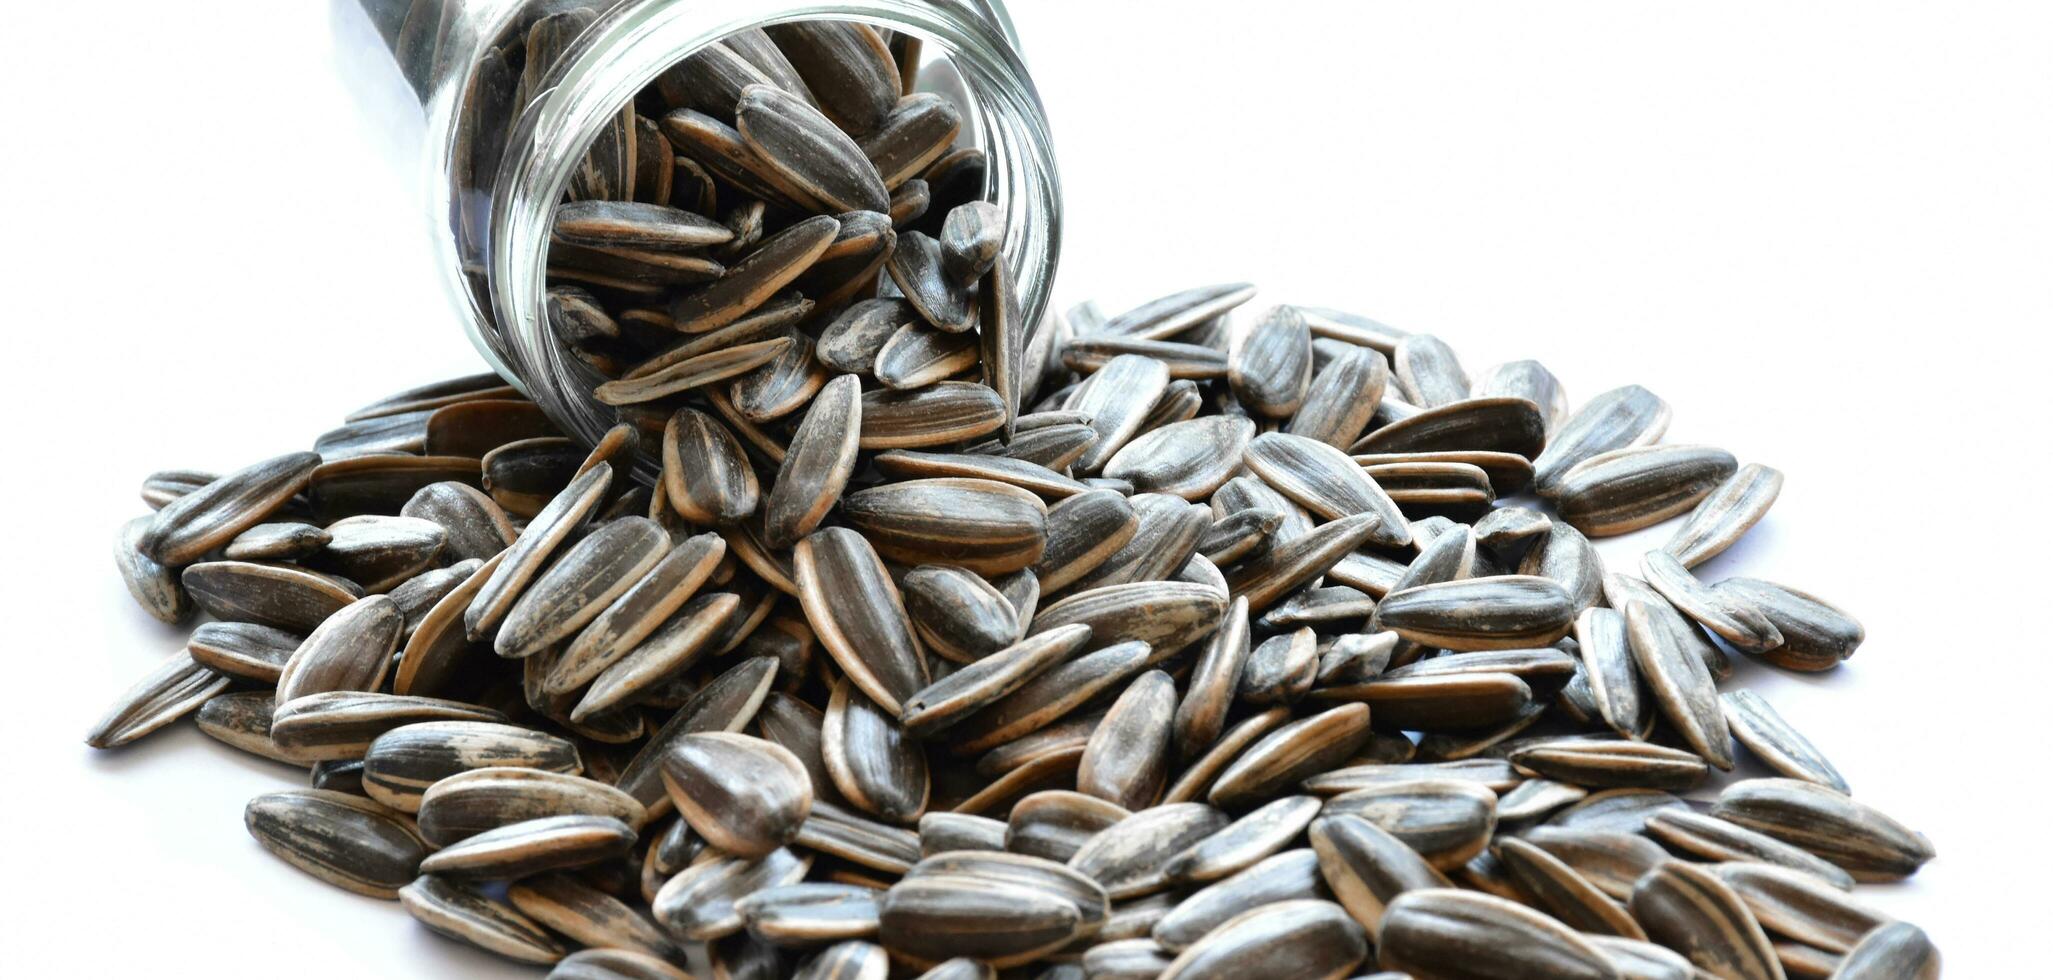 Sunflower seeds for eating as snack in freetimes. photo